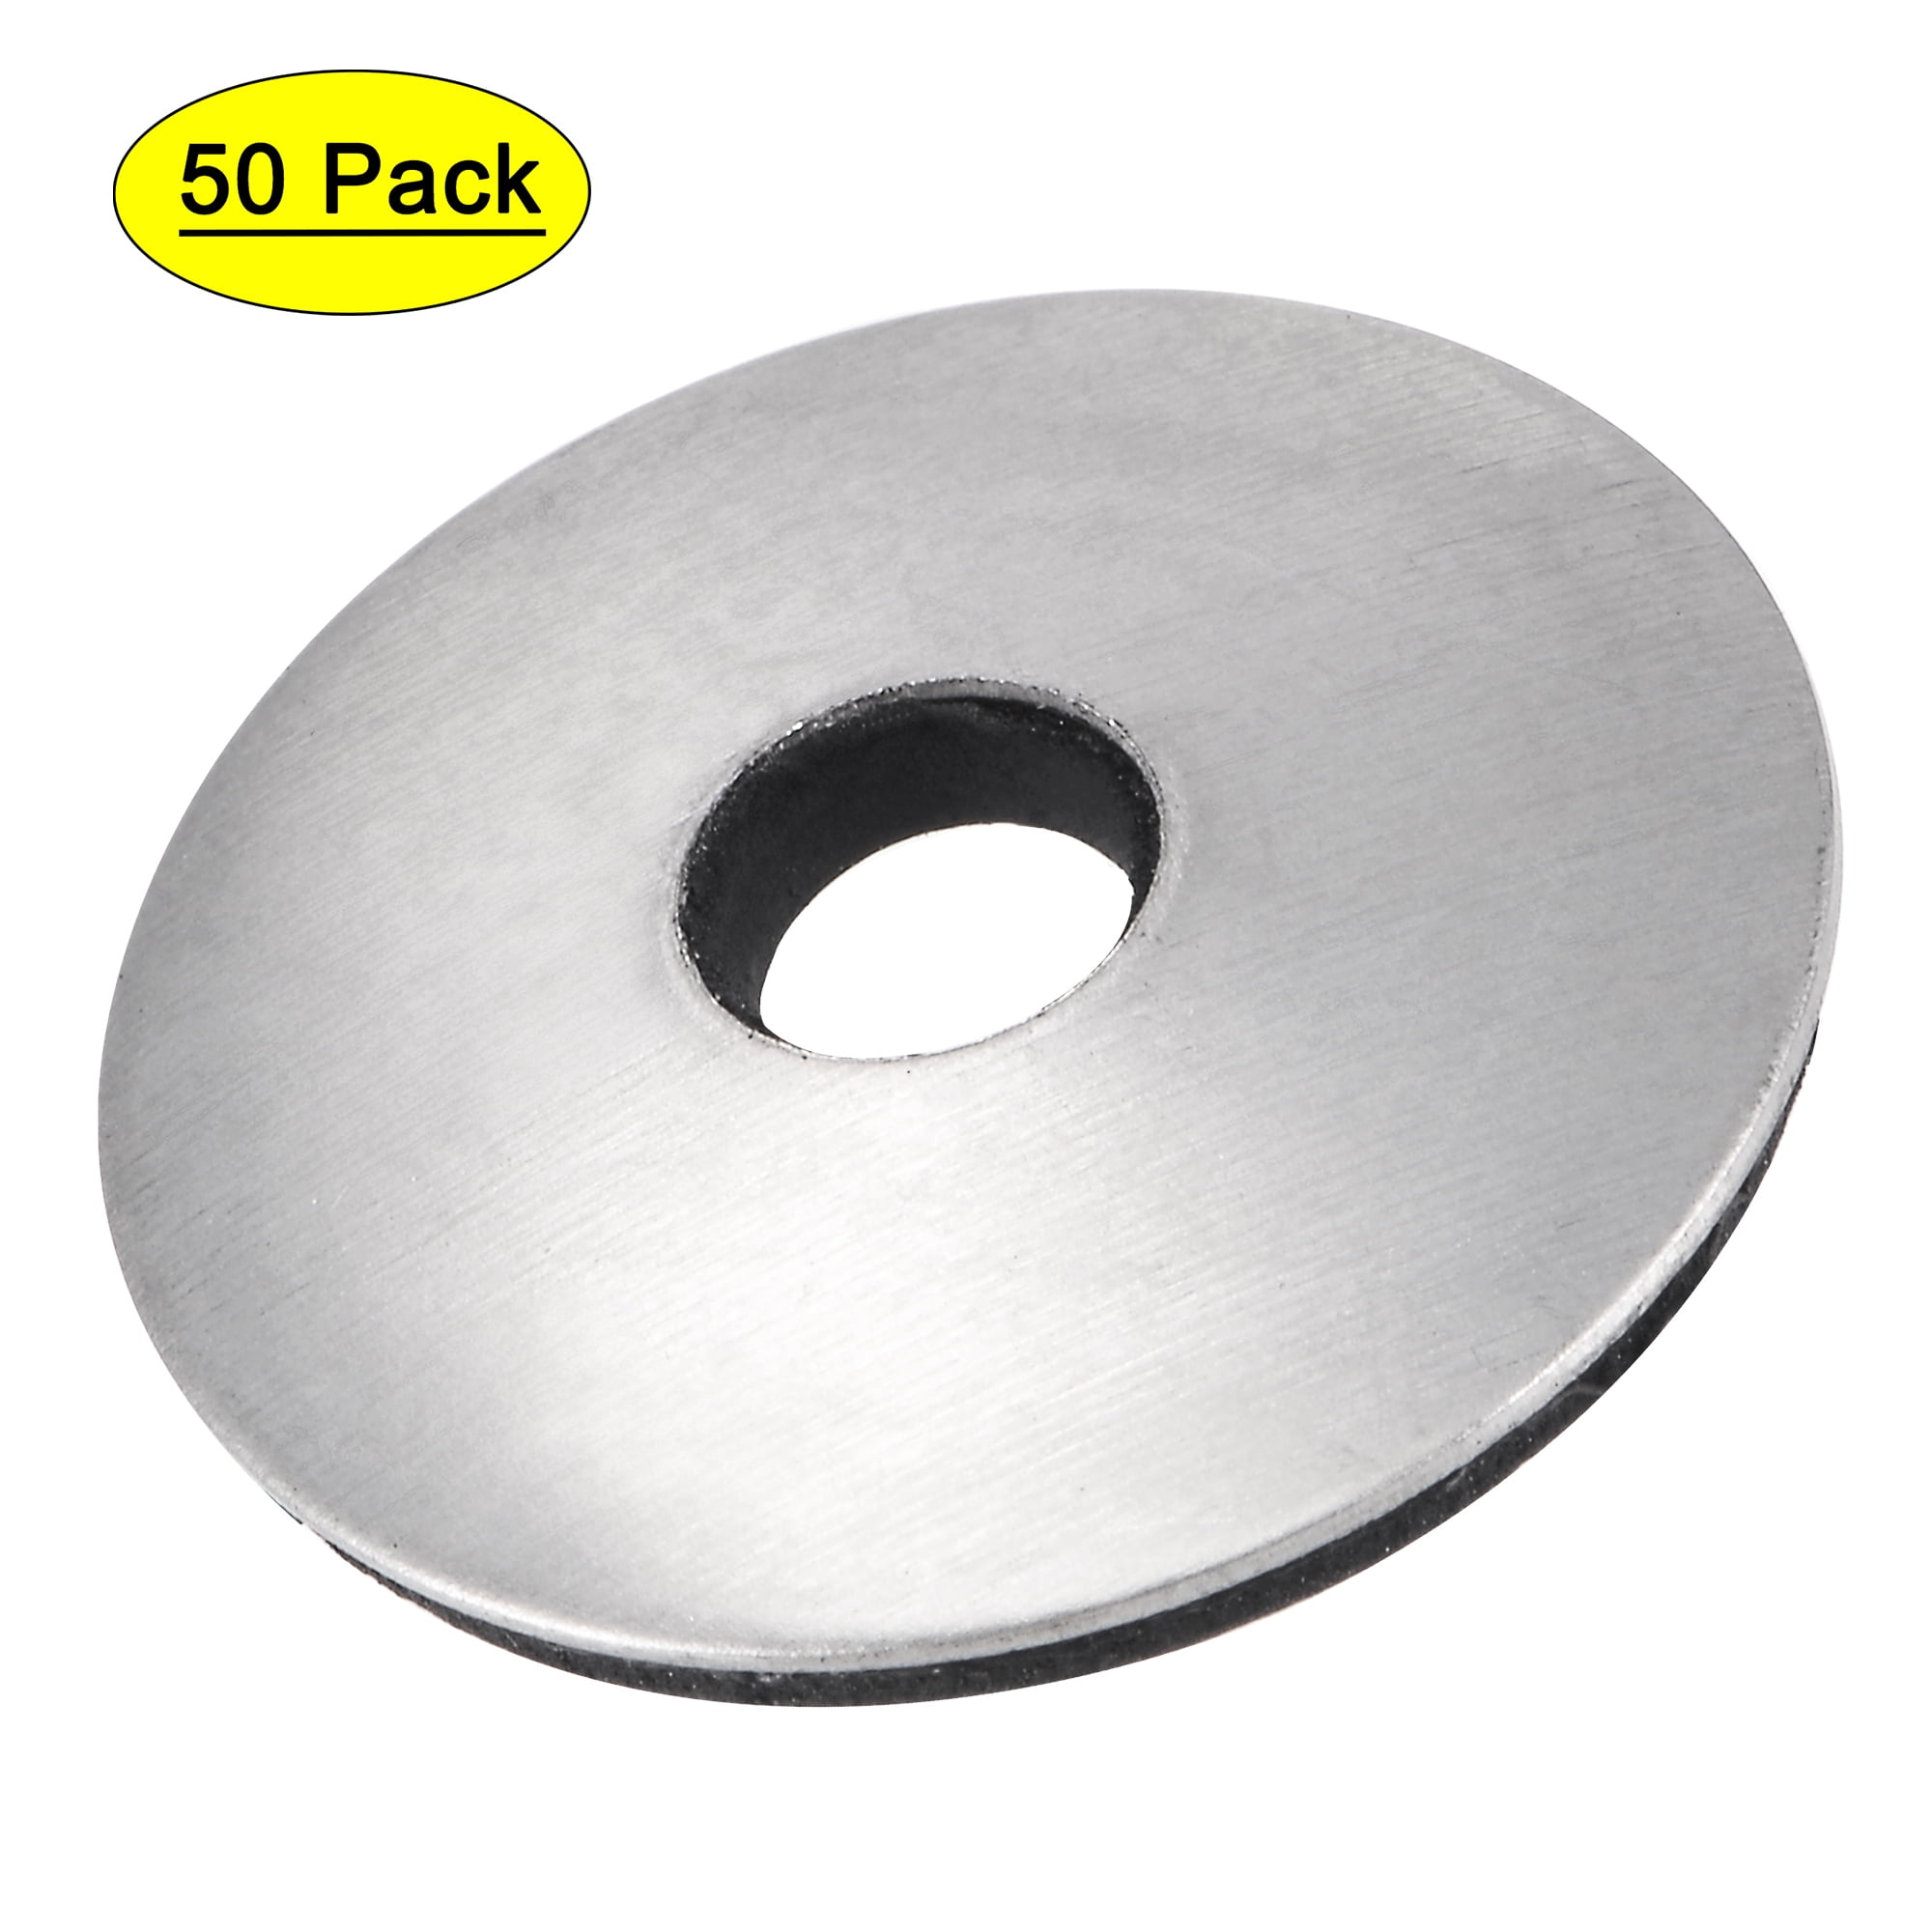 # 10 X 5/8 O.D Pack of 12 Stainless Steel Bonded Sealing Washers 